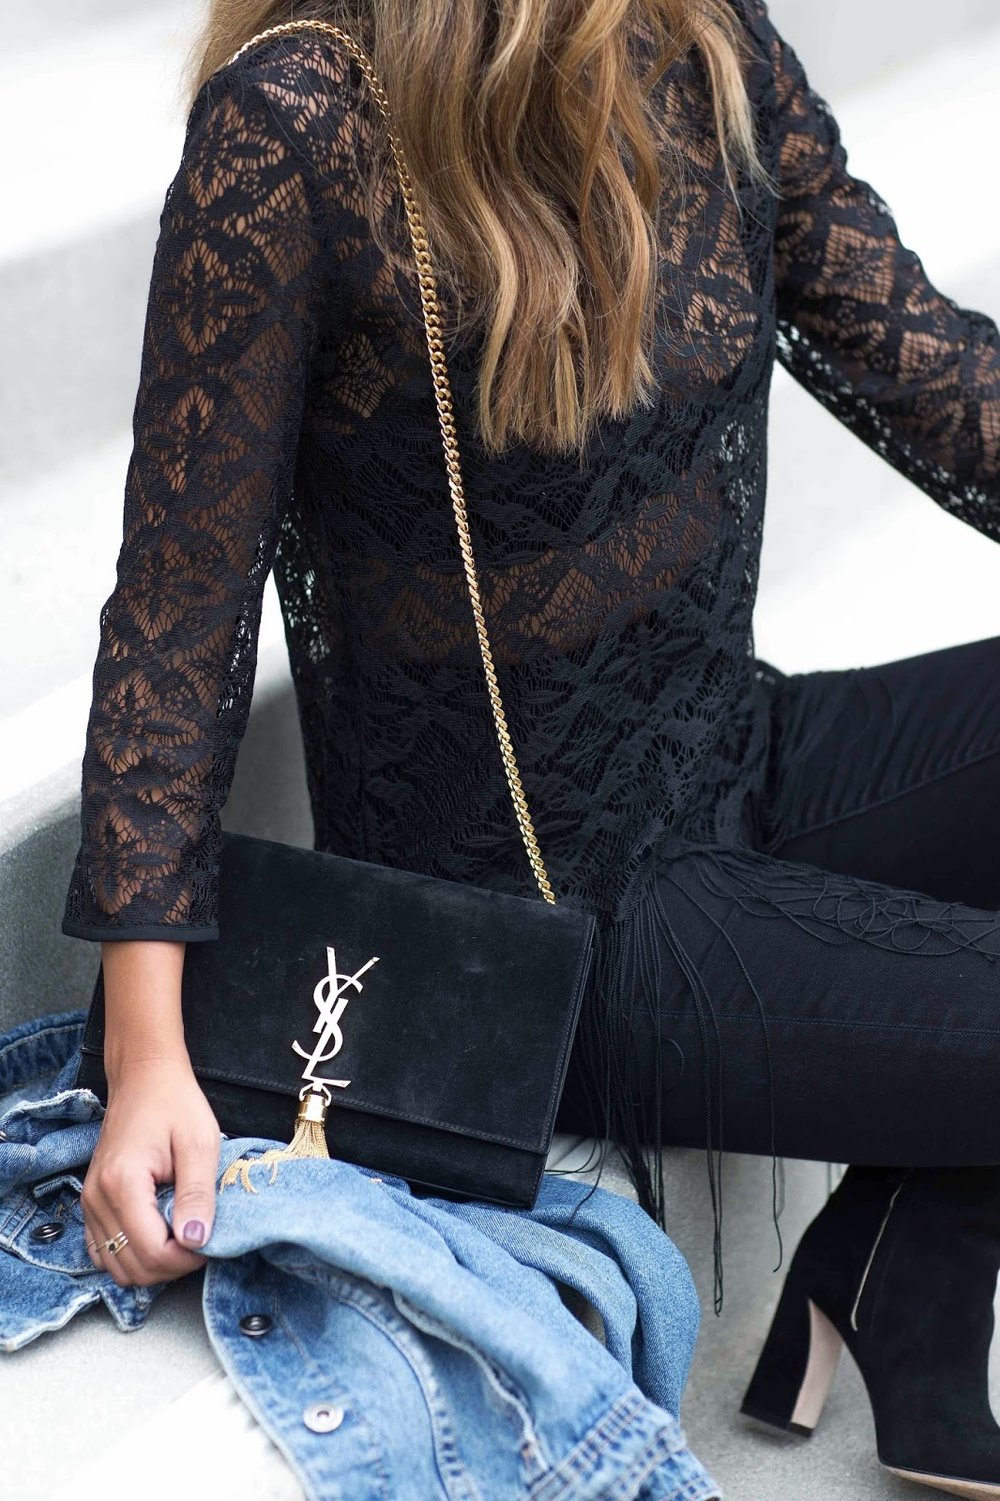 lace top zara, how to wear all black, denim jacket styles, black boot outfit for fall 